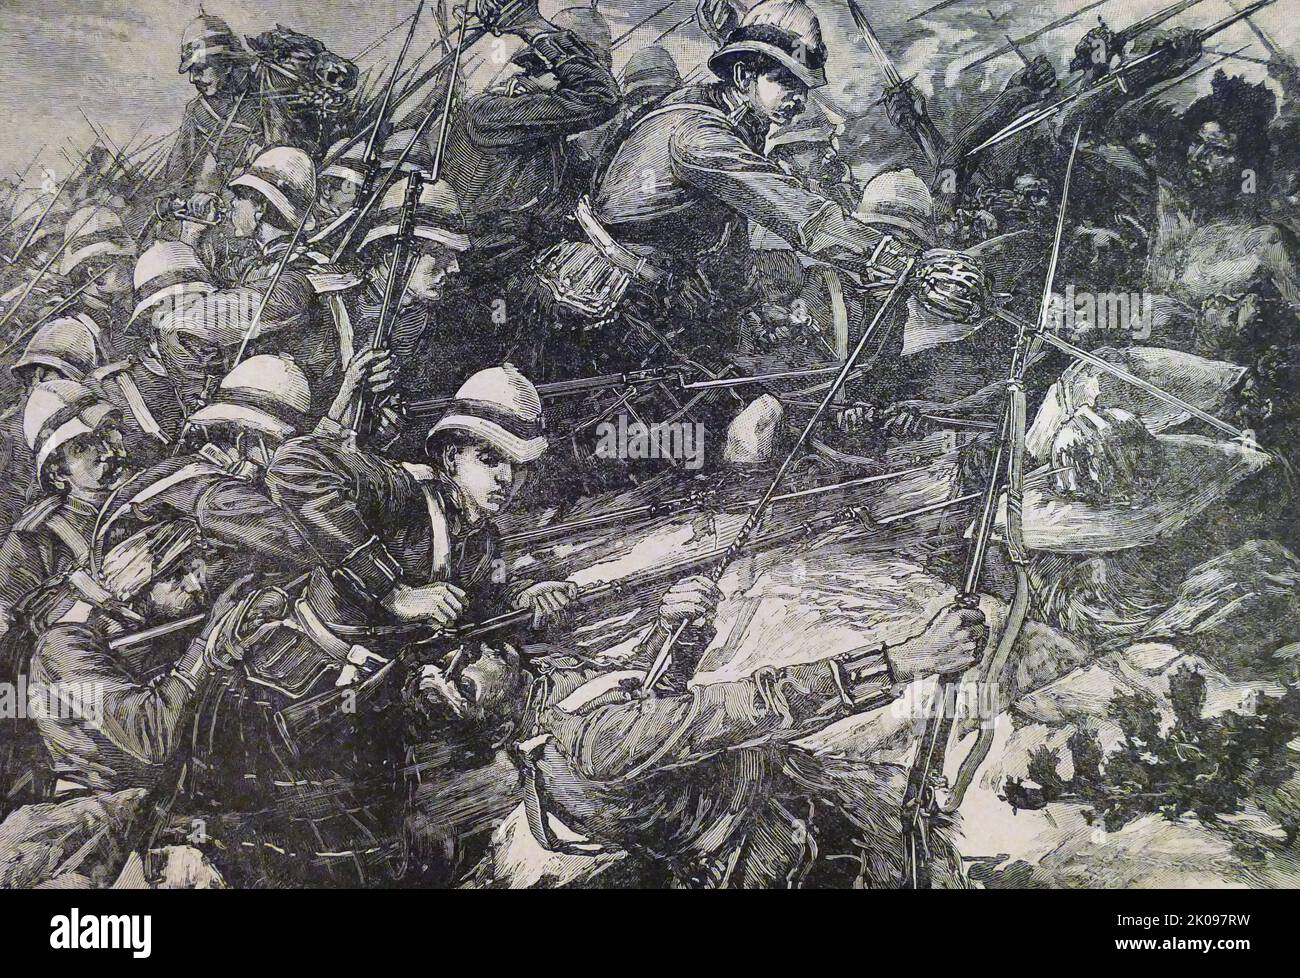 Black and white print from The Battle of Tamai (or Tamanieh) which took place on 13 March 1884 between a British force under Sir Gerald Graham and a Mahdist Sudanese army led by Osman Digna. Stock Photo